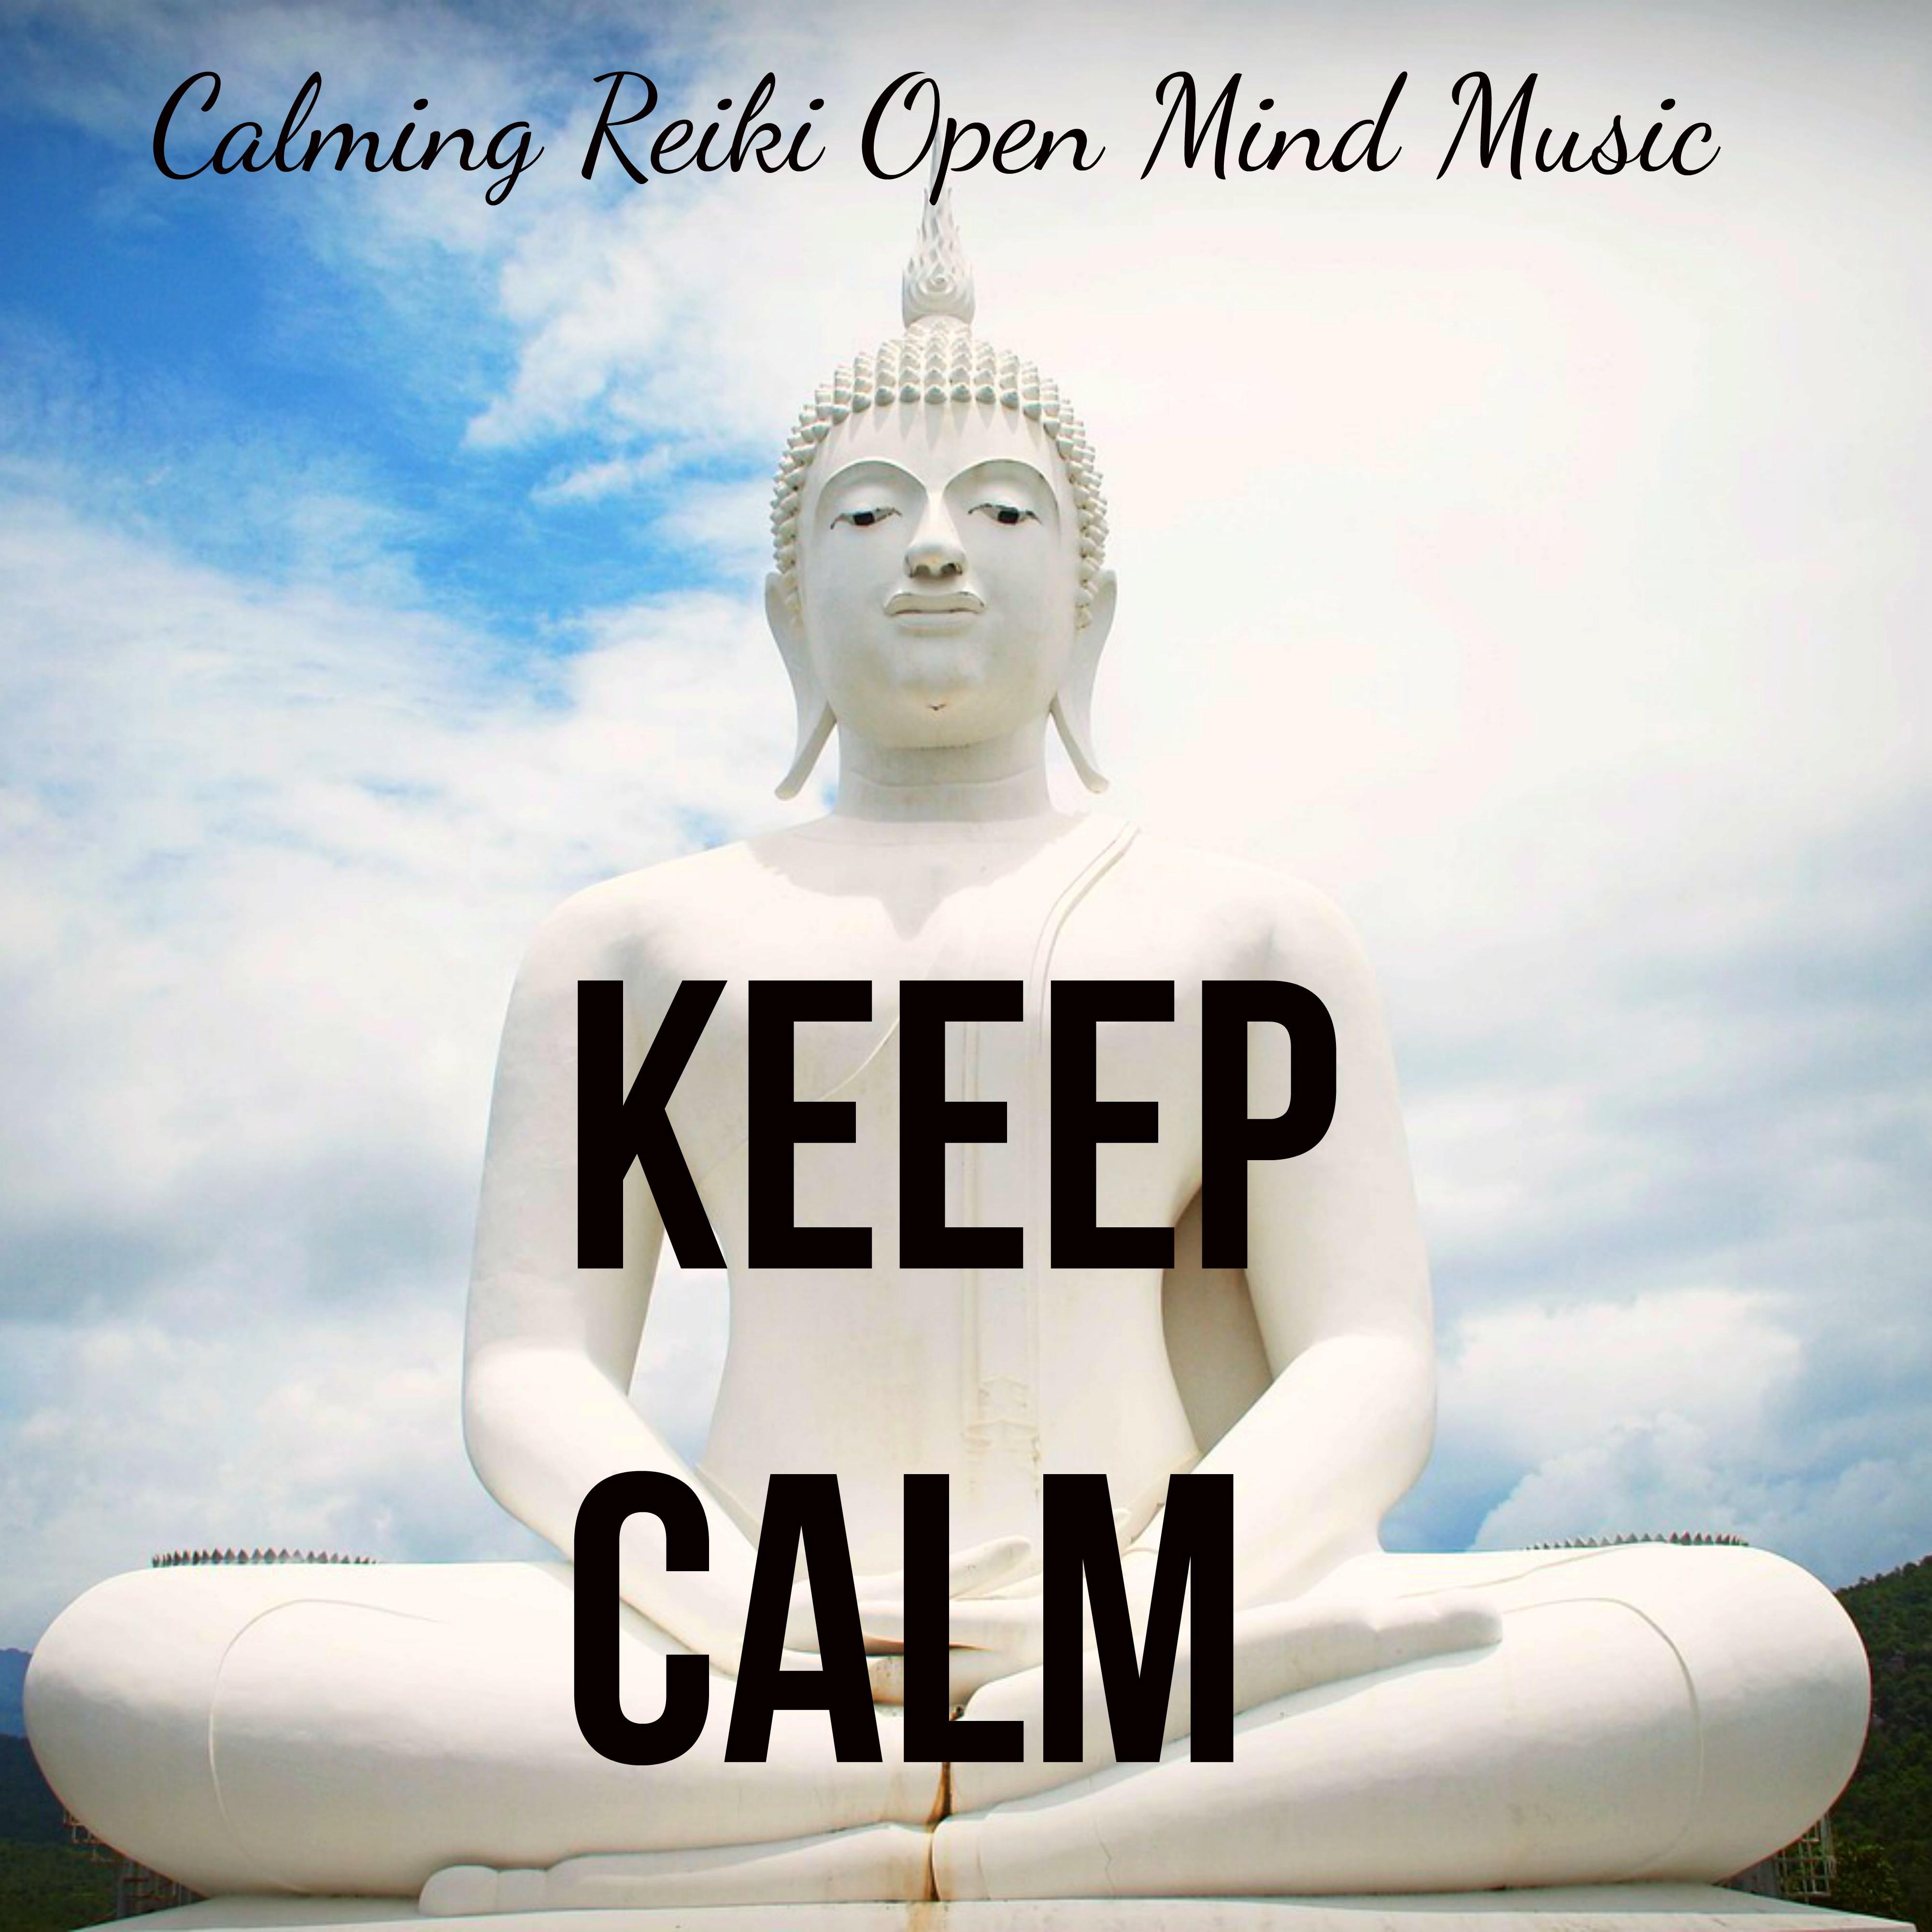 Keep Calm - Calming Reiki Open Mind Music for Stress Relief and Healing Therapy with New Age Meditative Sounds